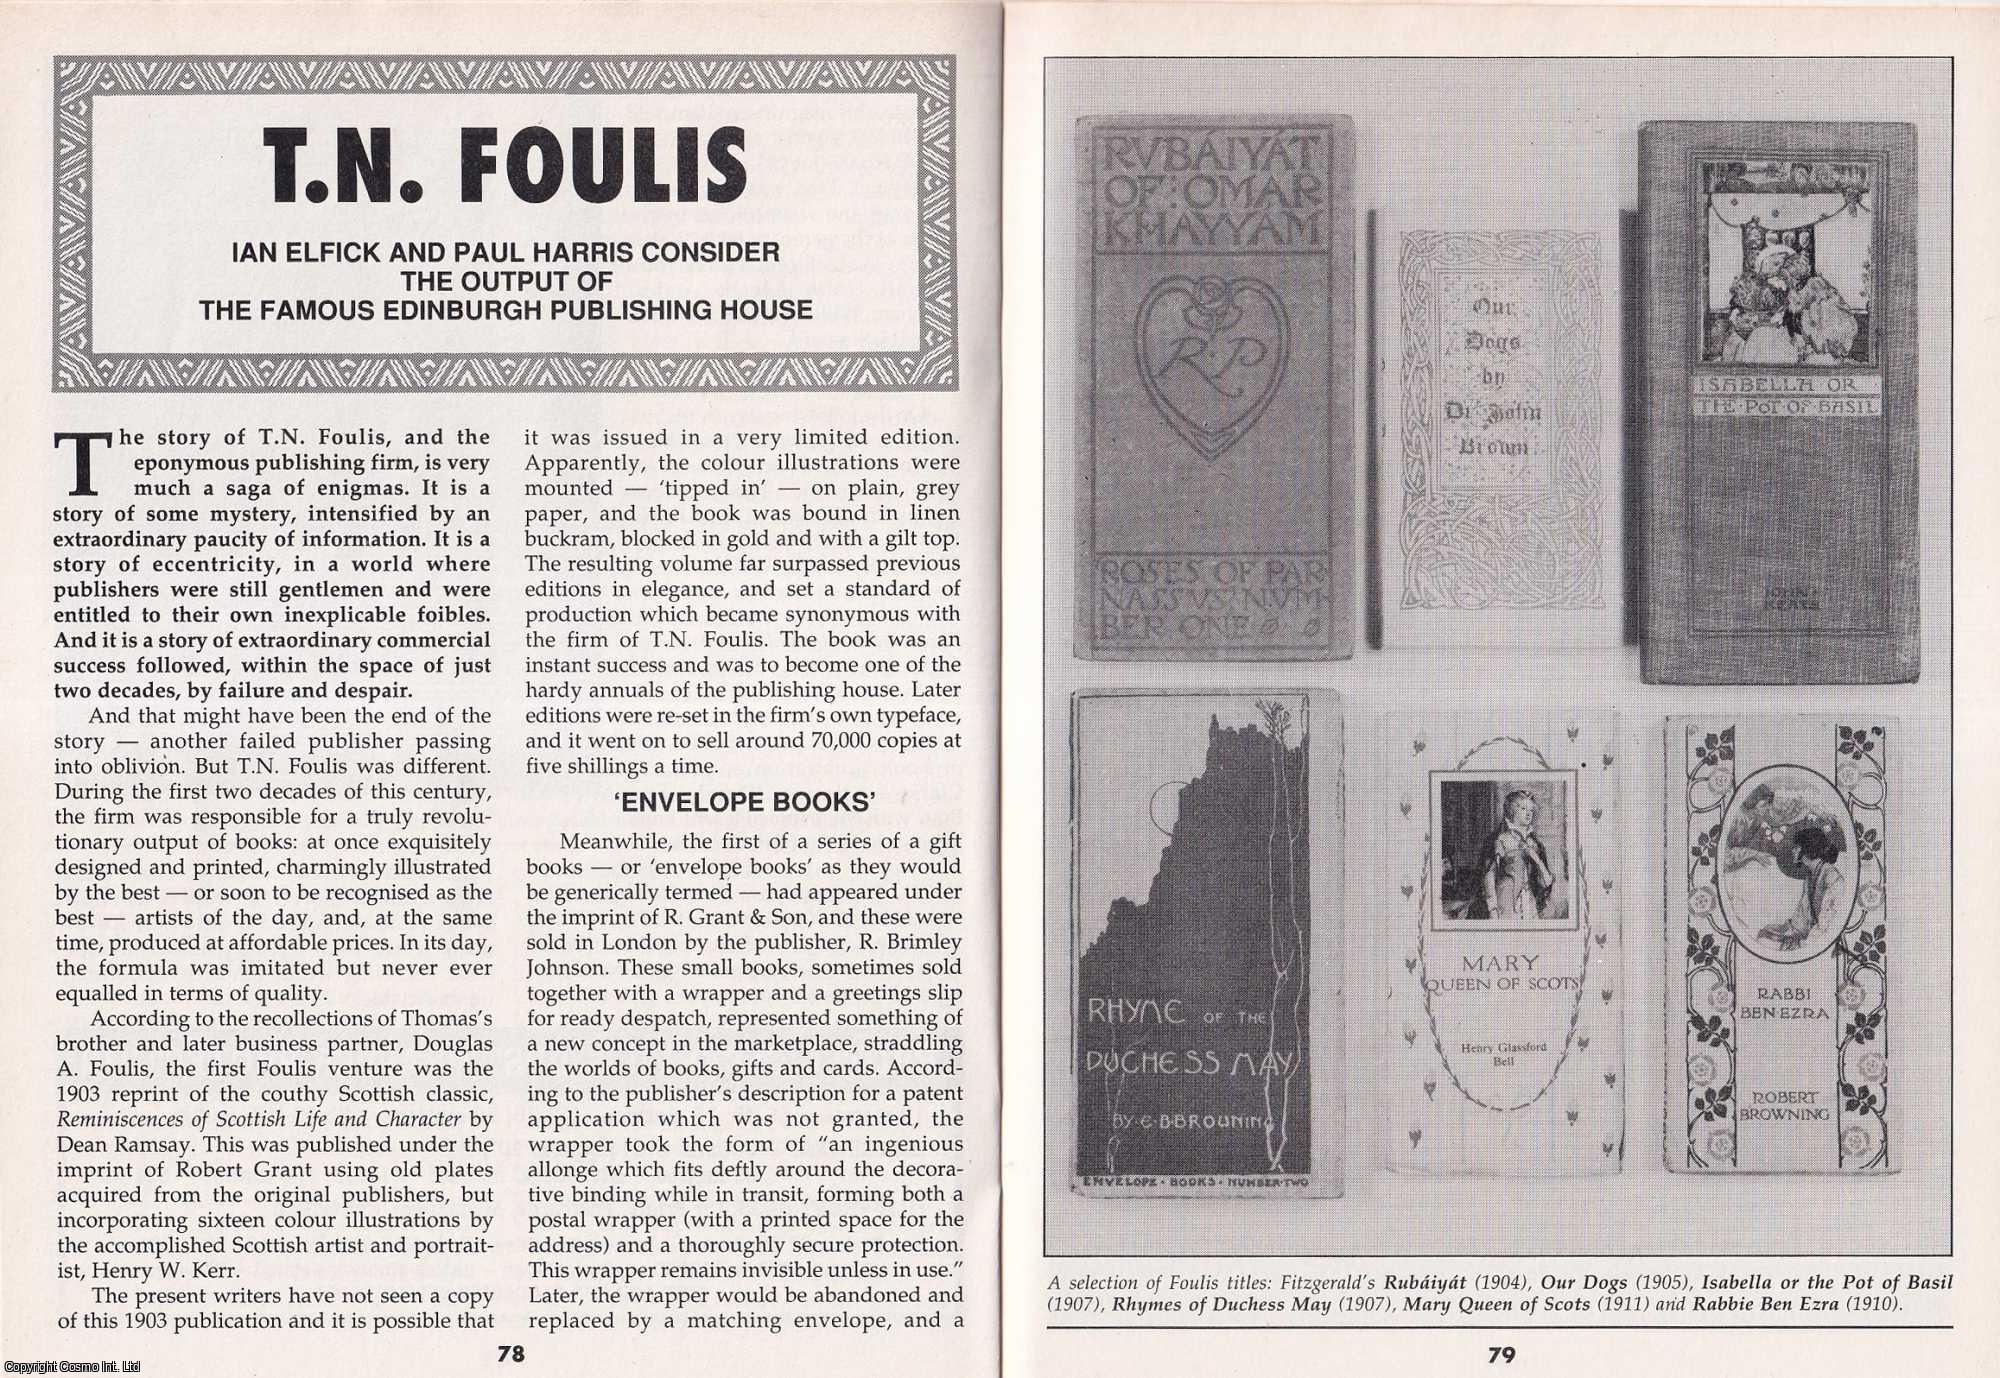 Ian Elfick & Paul Harris - T. N. Foulis. Considering The Output of The Famous Edinburgh Publishing House. This is an original article separated from an issue of The Book & Magazine Collector publication.